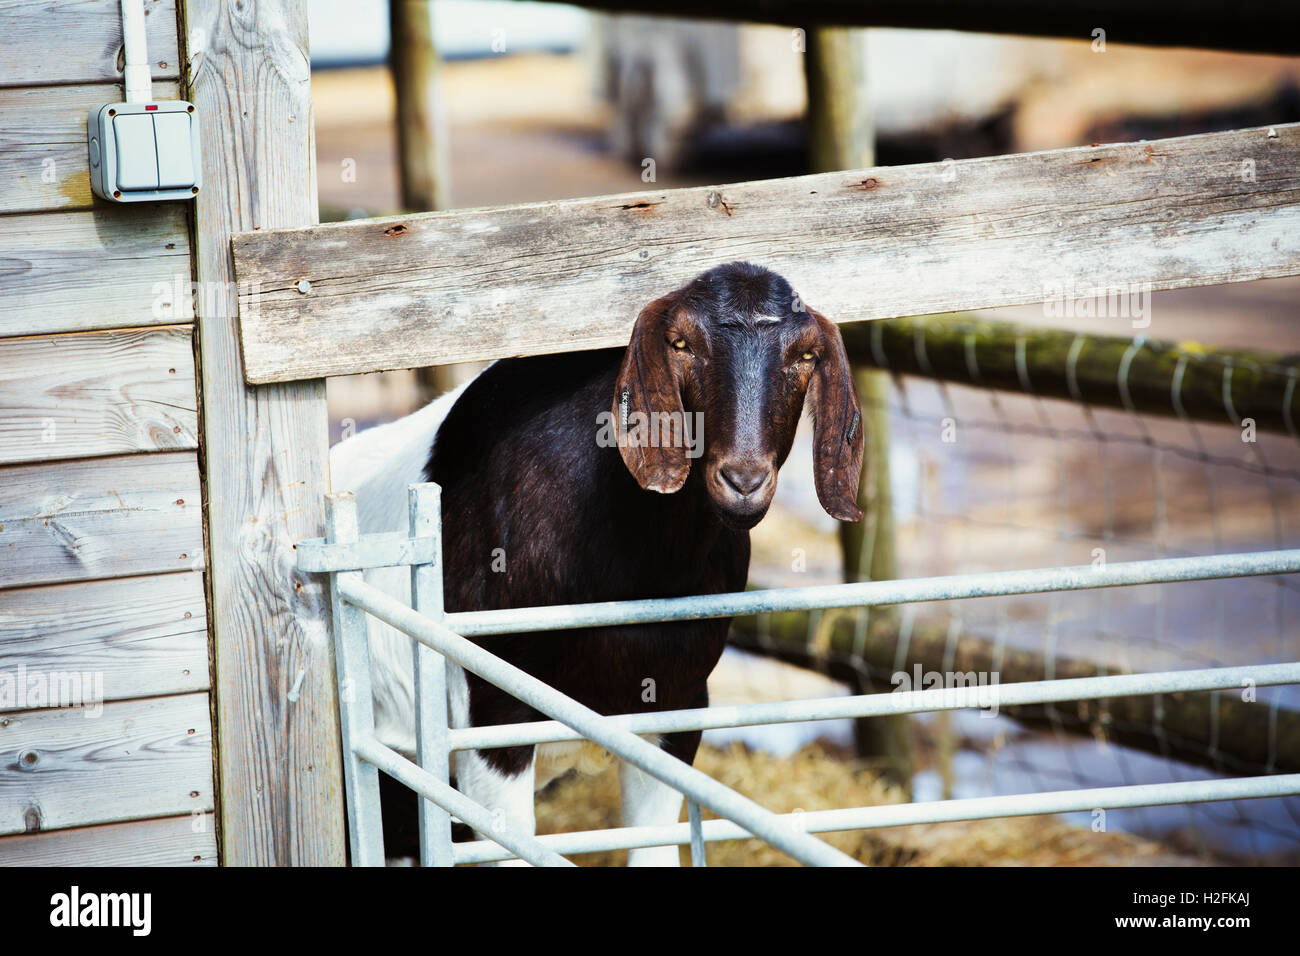 Brown goat standing in an outdoor enclosure, looking at camera. Stock Photo